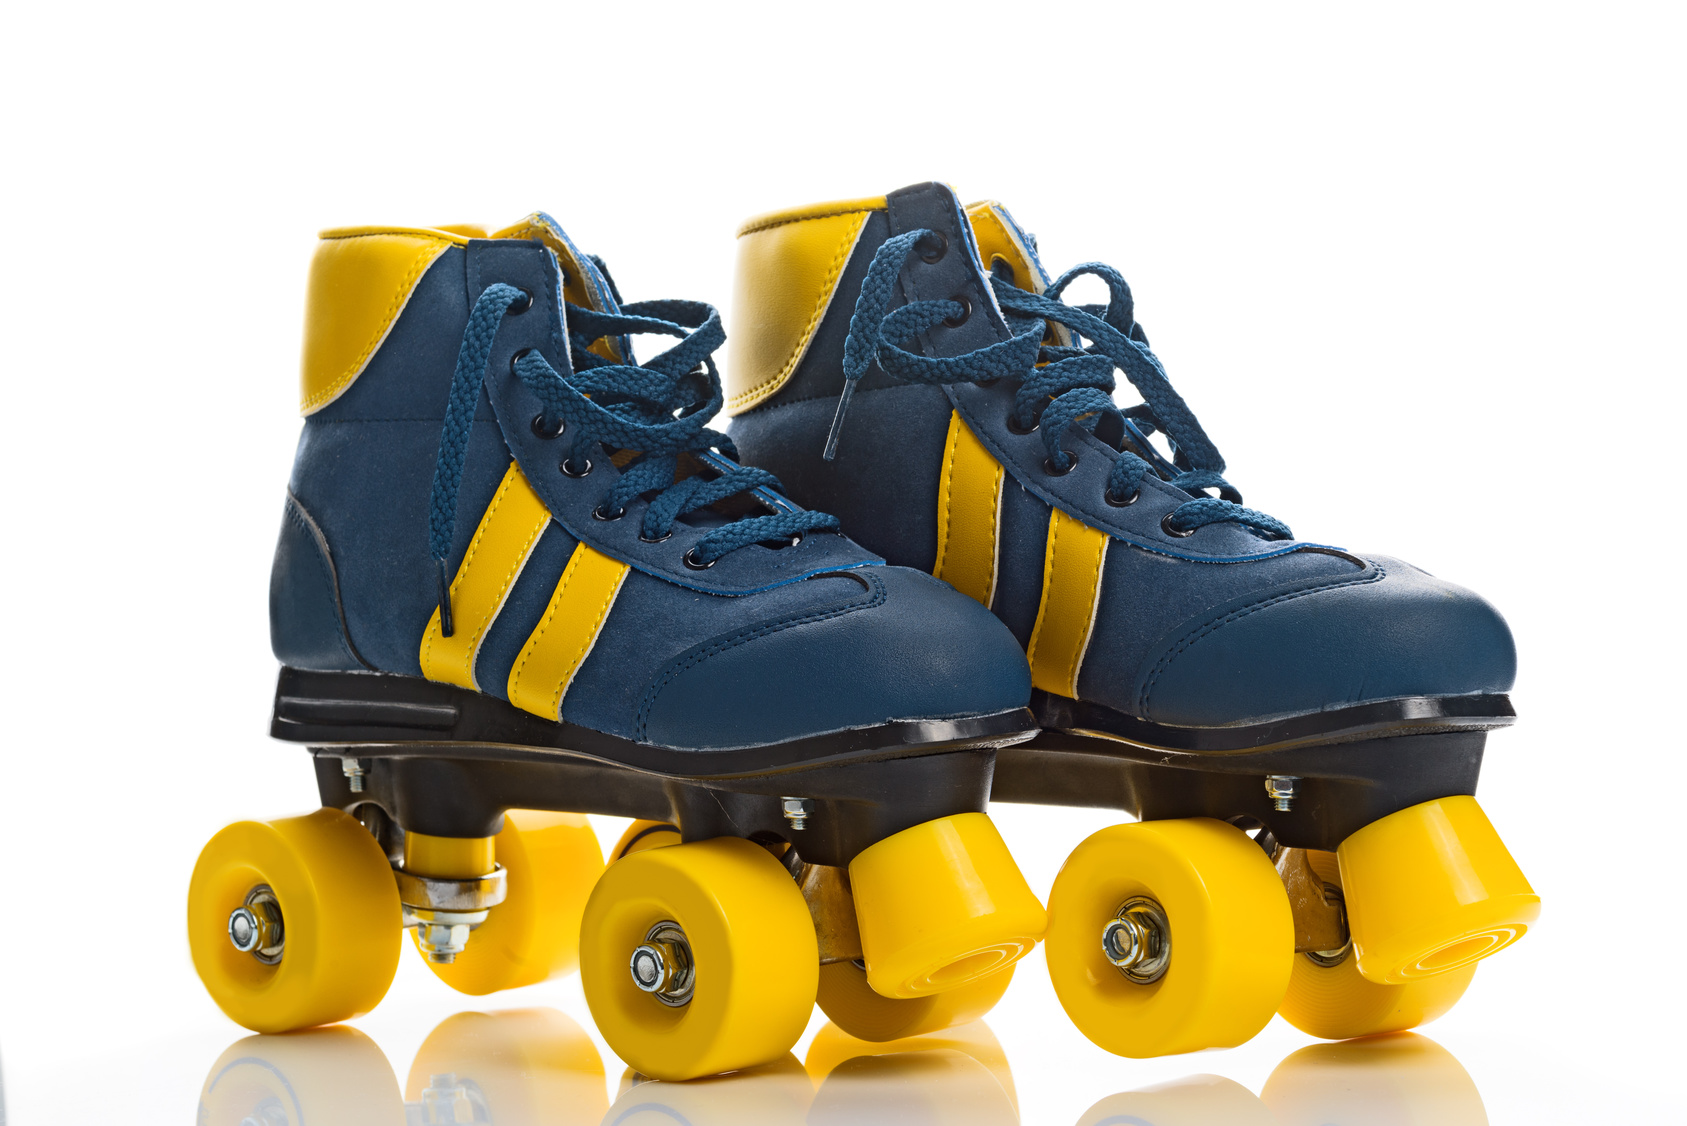 Vintage Retro Blue and Yellow Quad Roller Skates on White Background with Reflection.